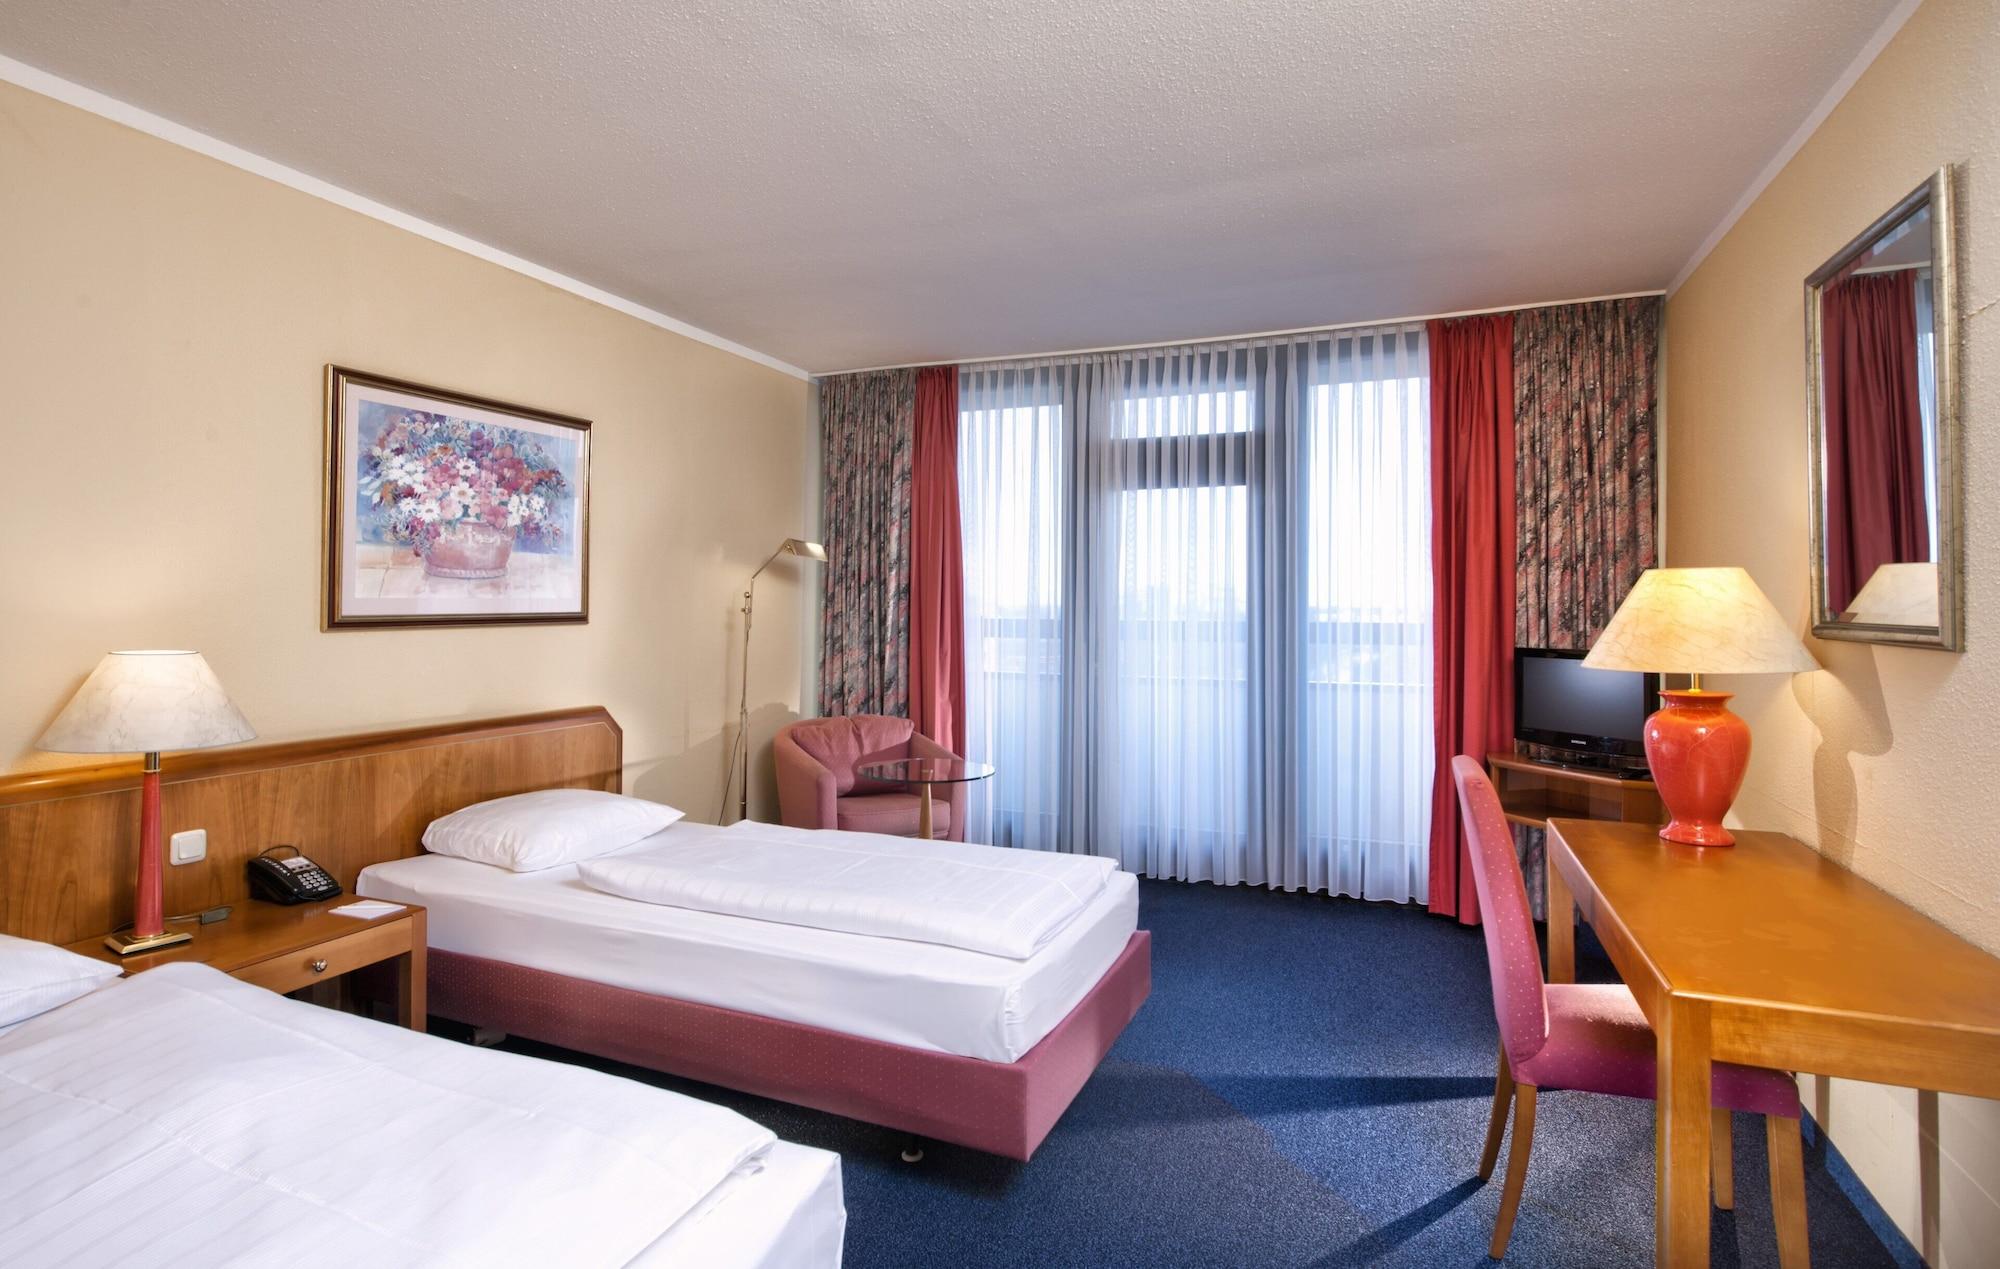 Hotel Excelsior Ludwigshafen Room photo